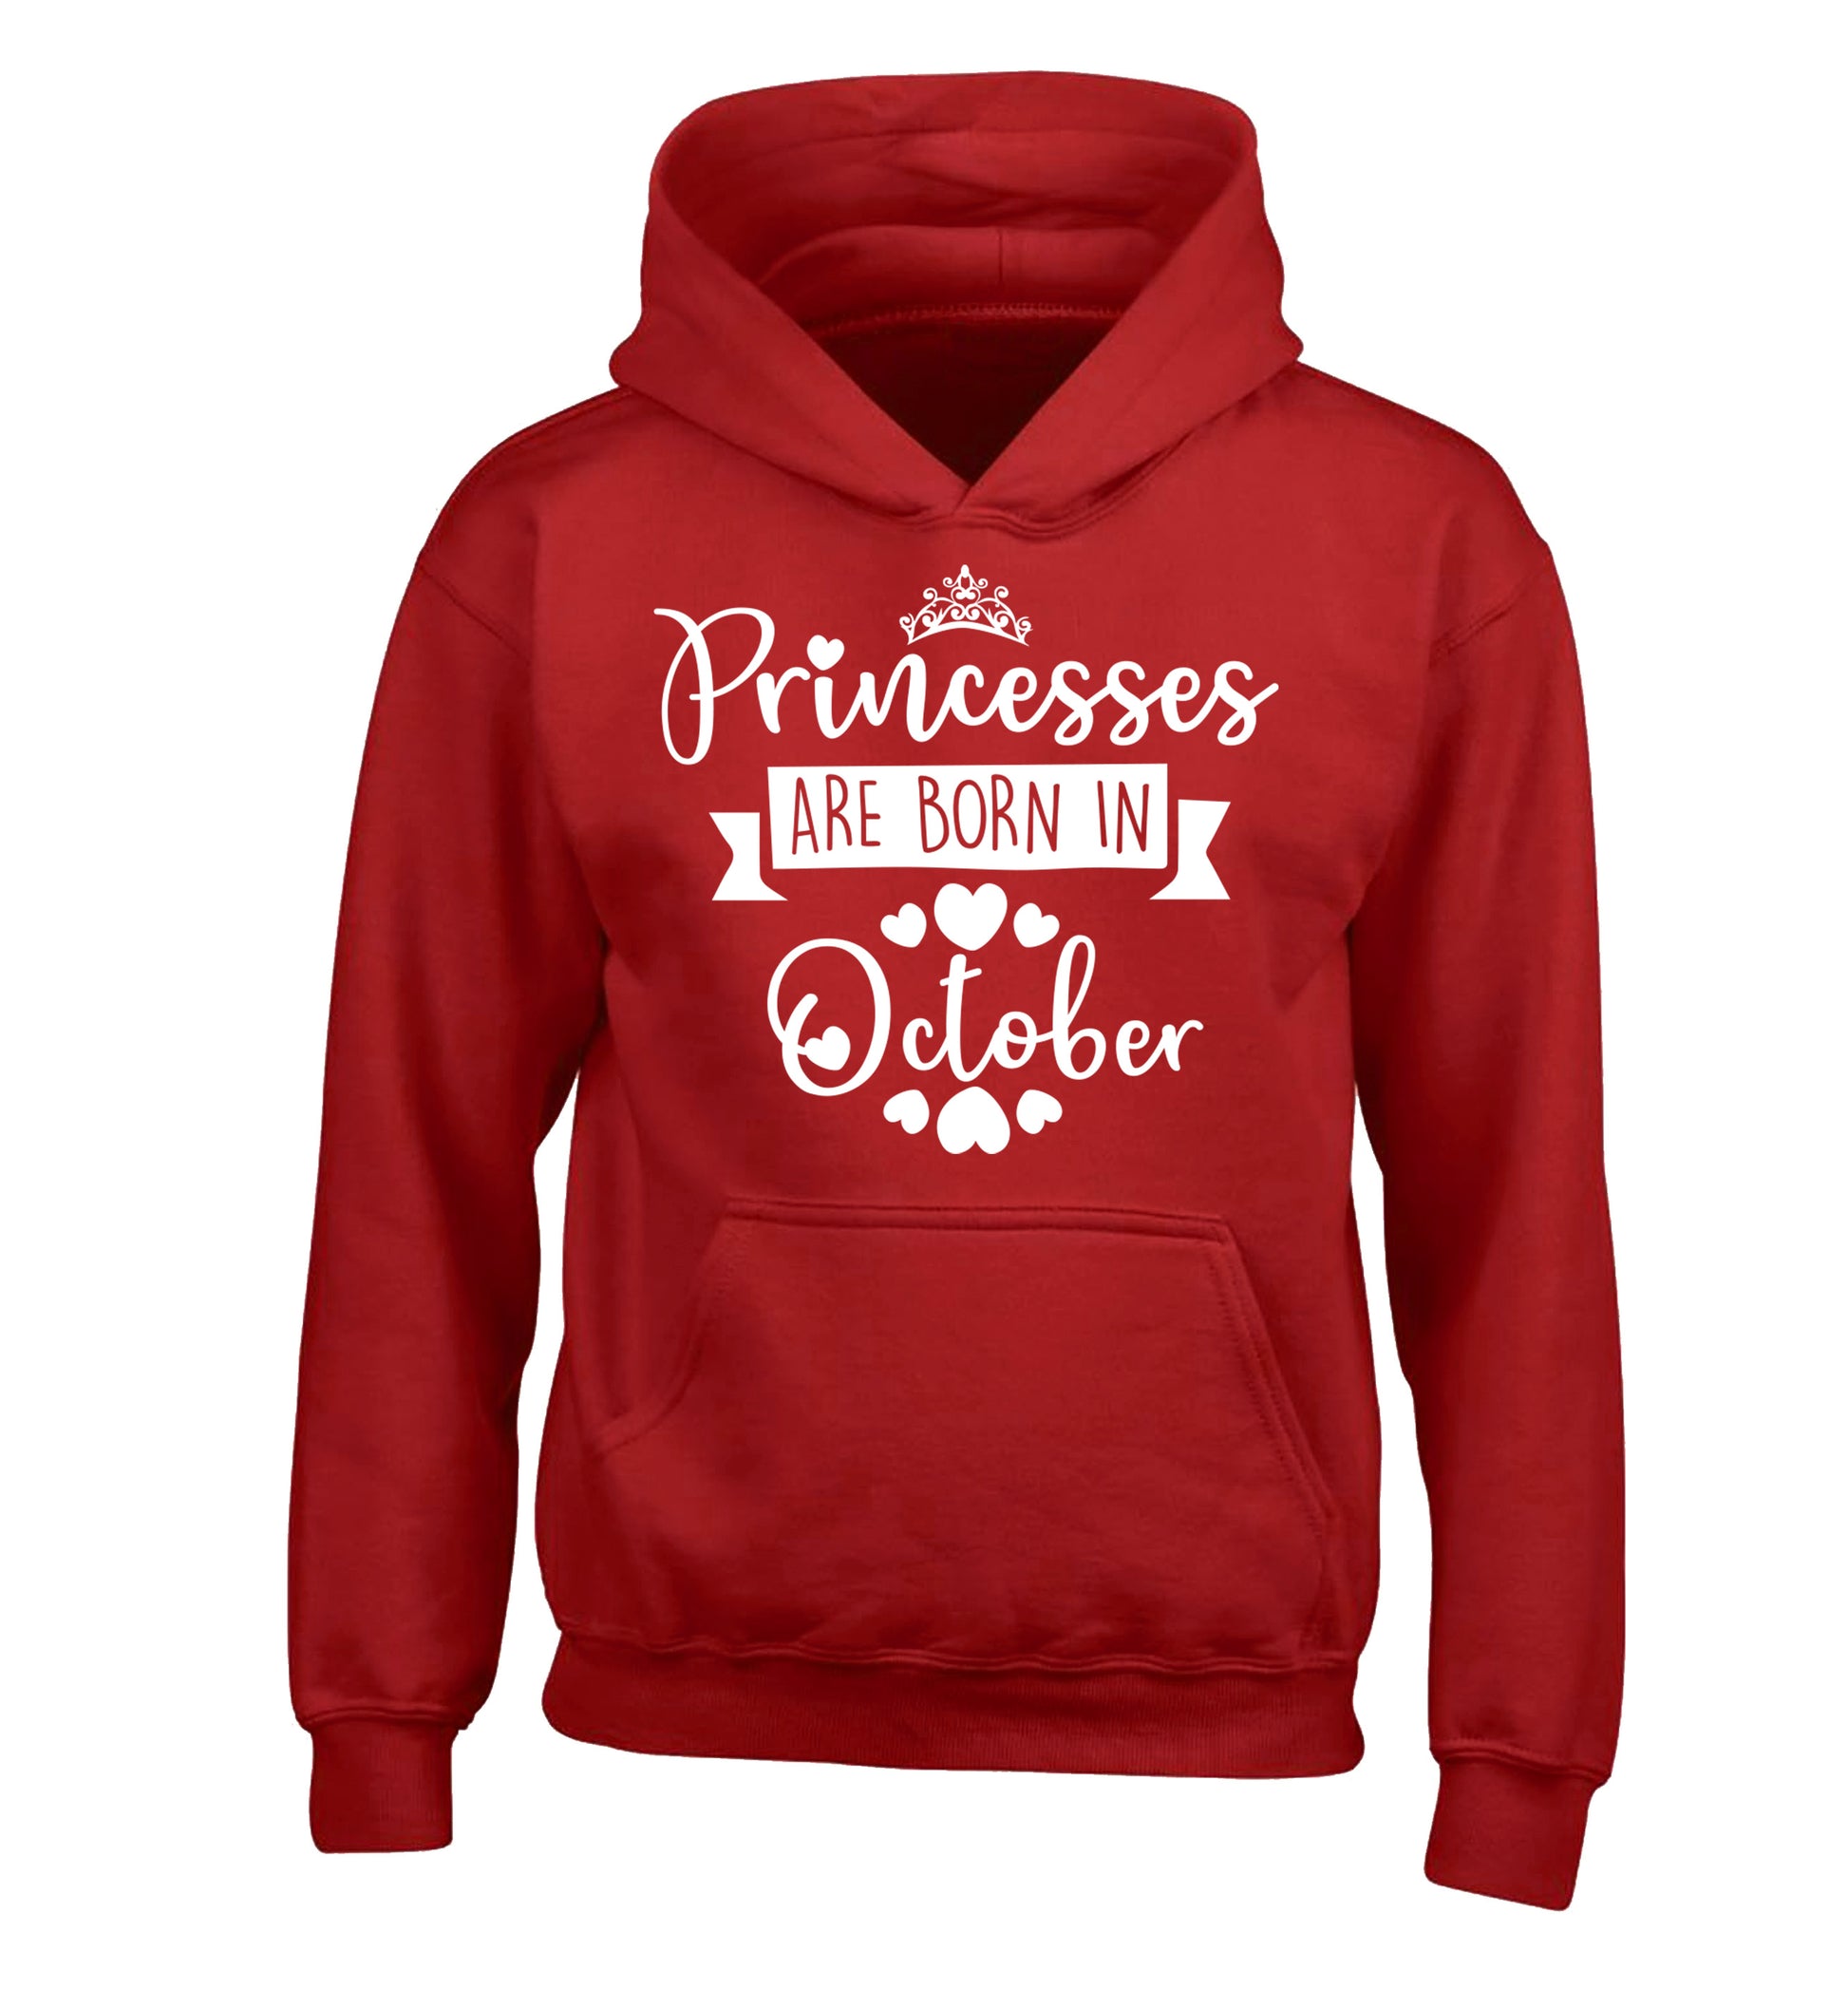 Princesses are born in October children's red hoodie 12-13 Years